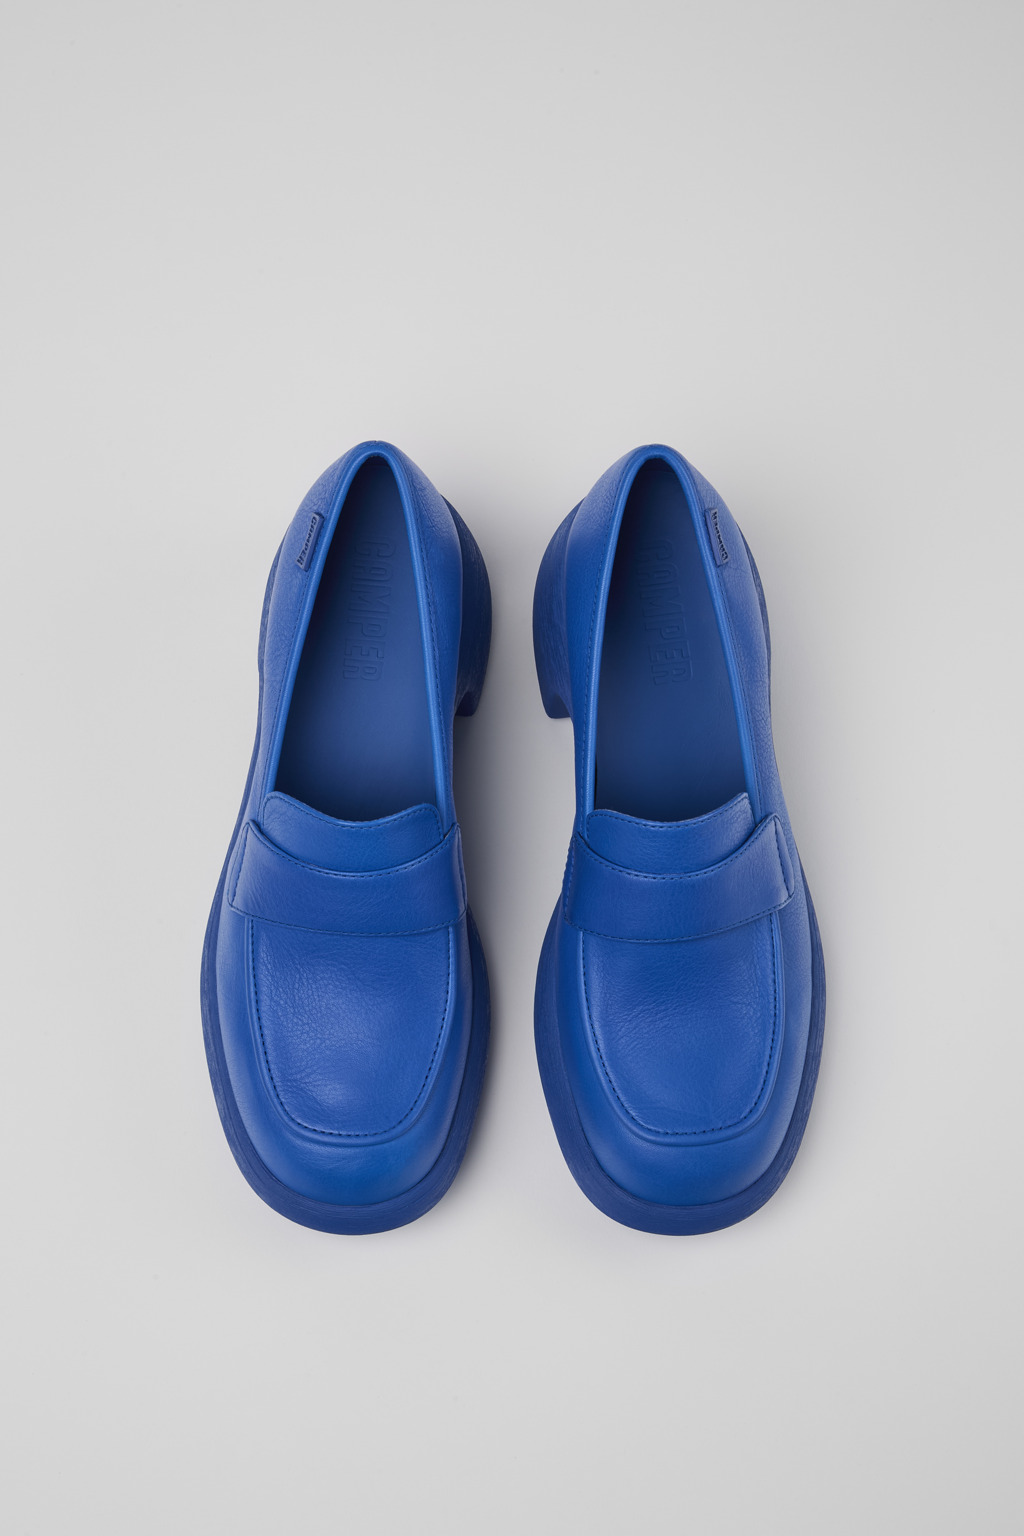 Thelma Blue Loafers for Women - Fall/Winter collection - Camper USA